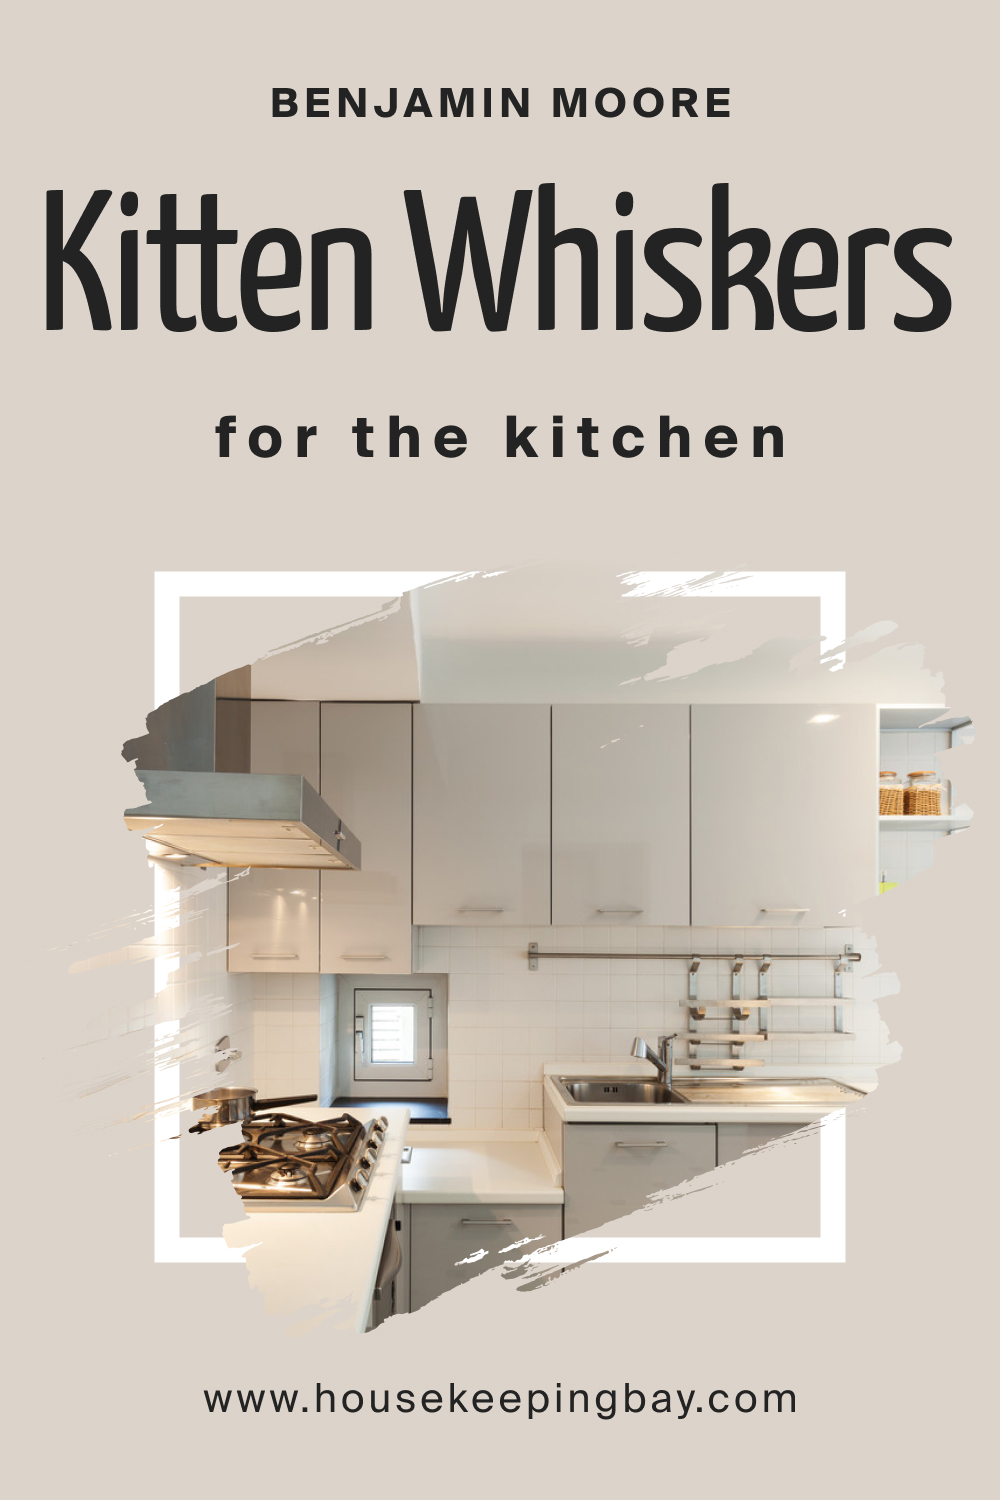 How to Use BM Kitten Whiskers 1003 in the Kitchen?